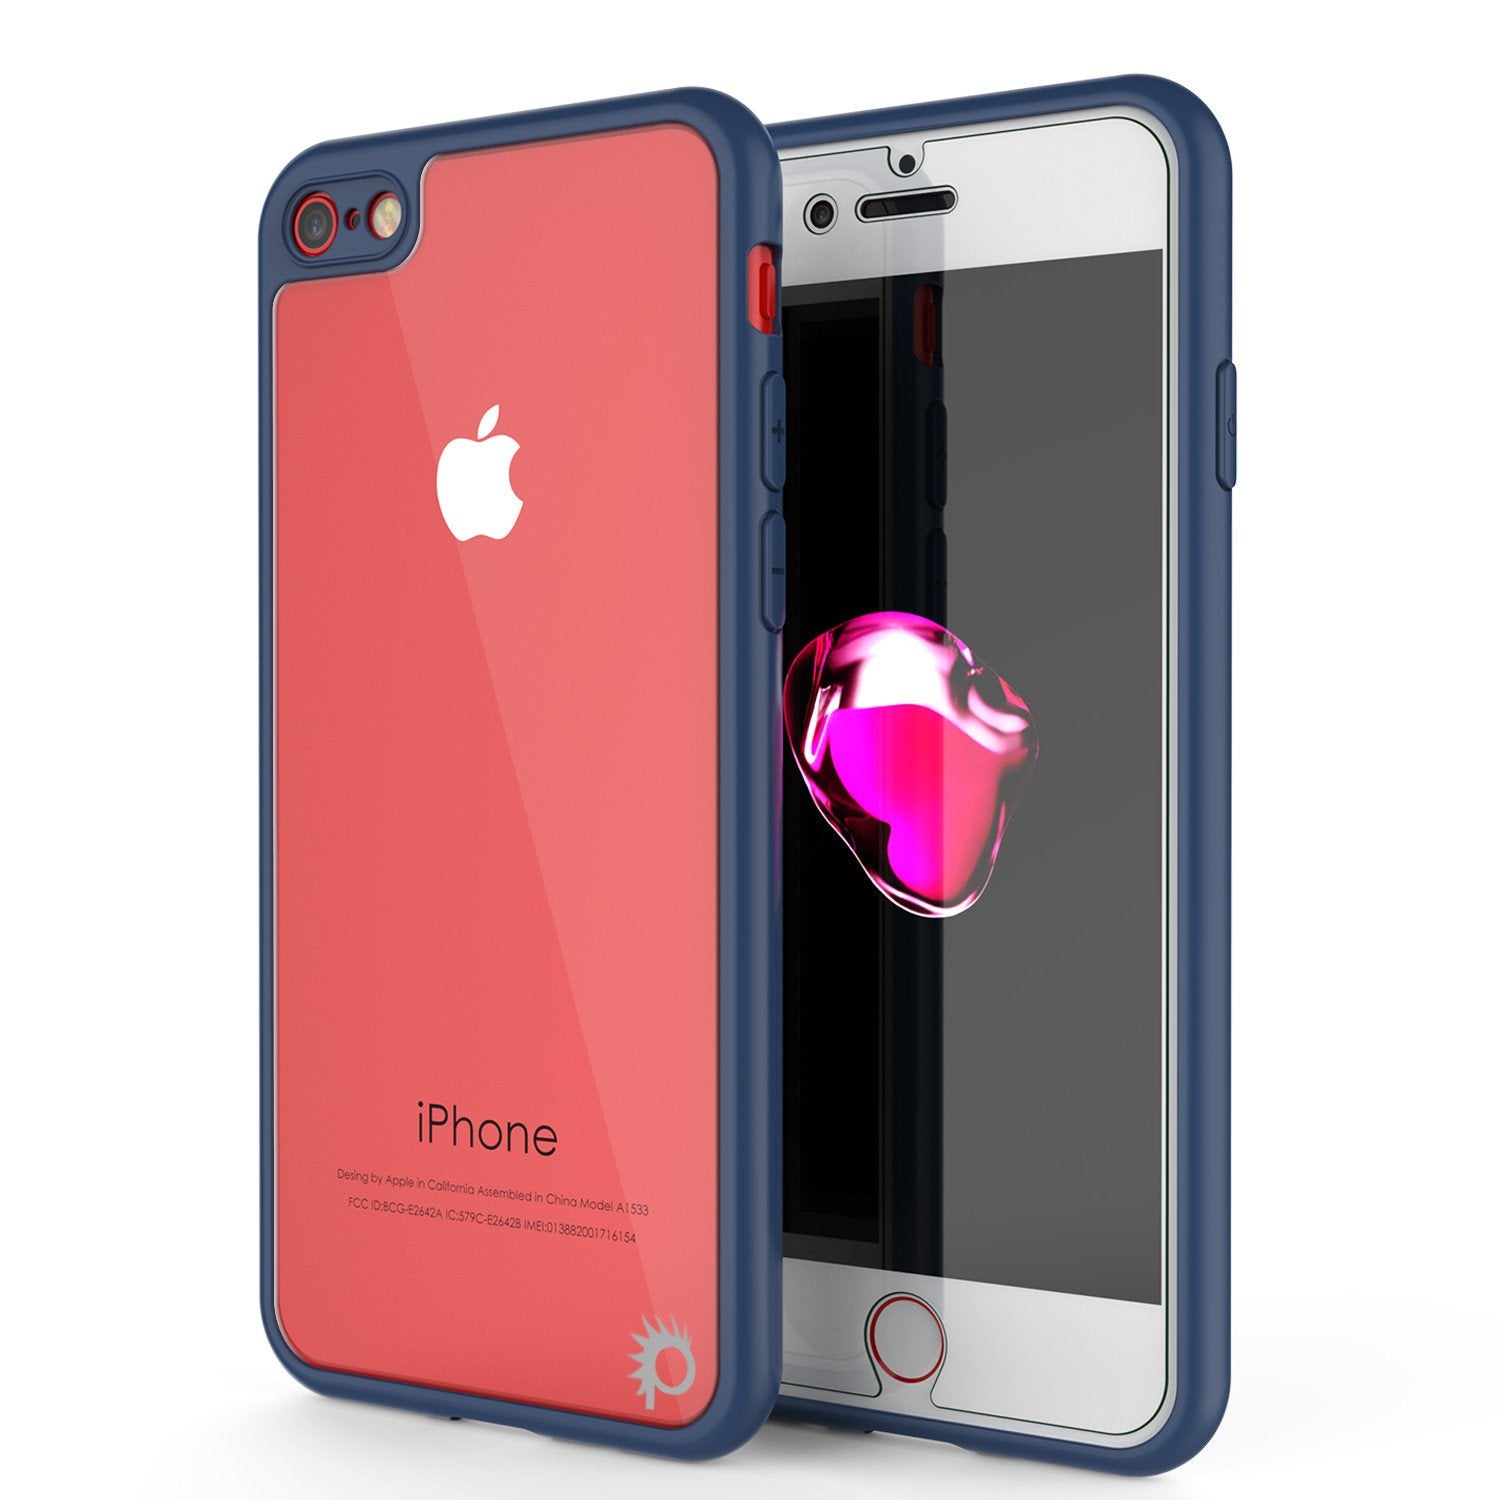 iPhone 7 Case [MASK Series] [NAVY] Full Body Hybrid Dual Layer TPU Cover W/ protective Tempered Glass Screen Protector